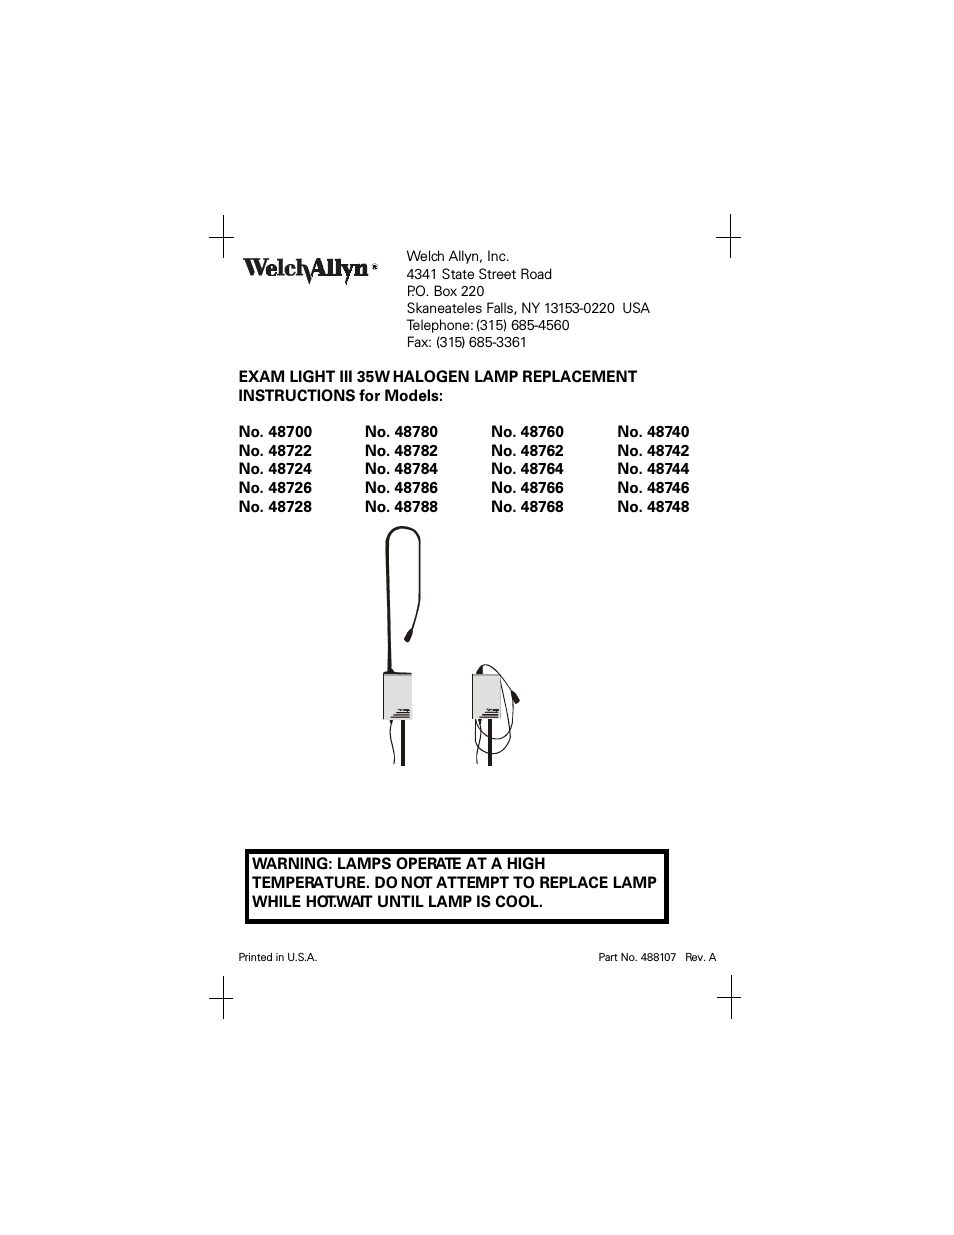 Exam Light III 35W Halogen Lamp Replacement Instructions - Quick Reference Guide